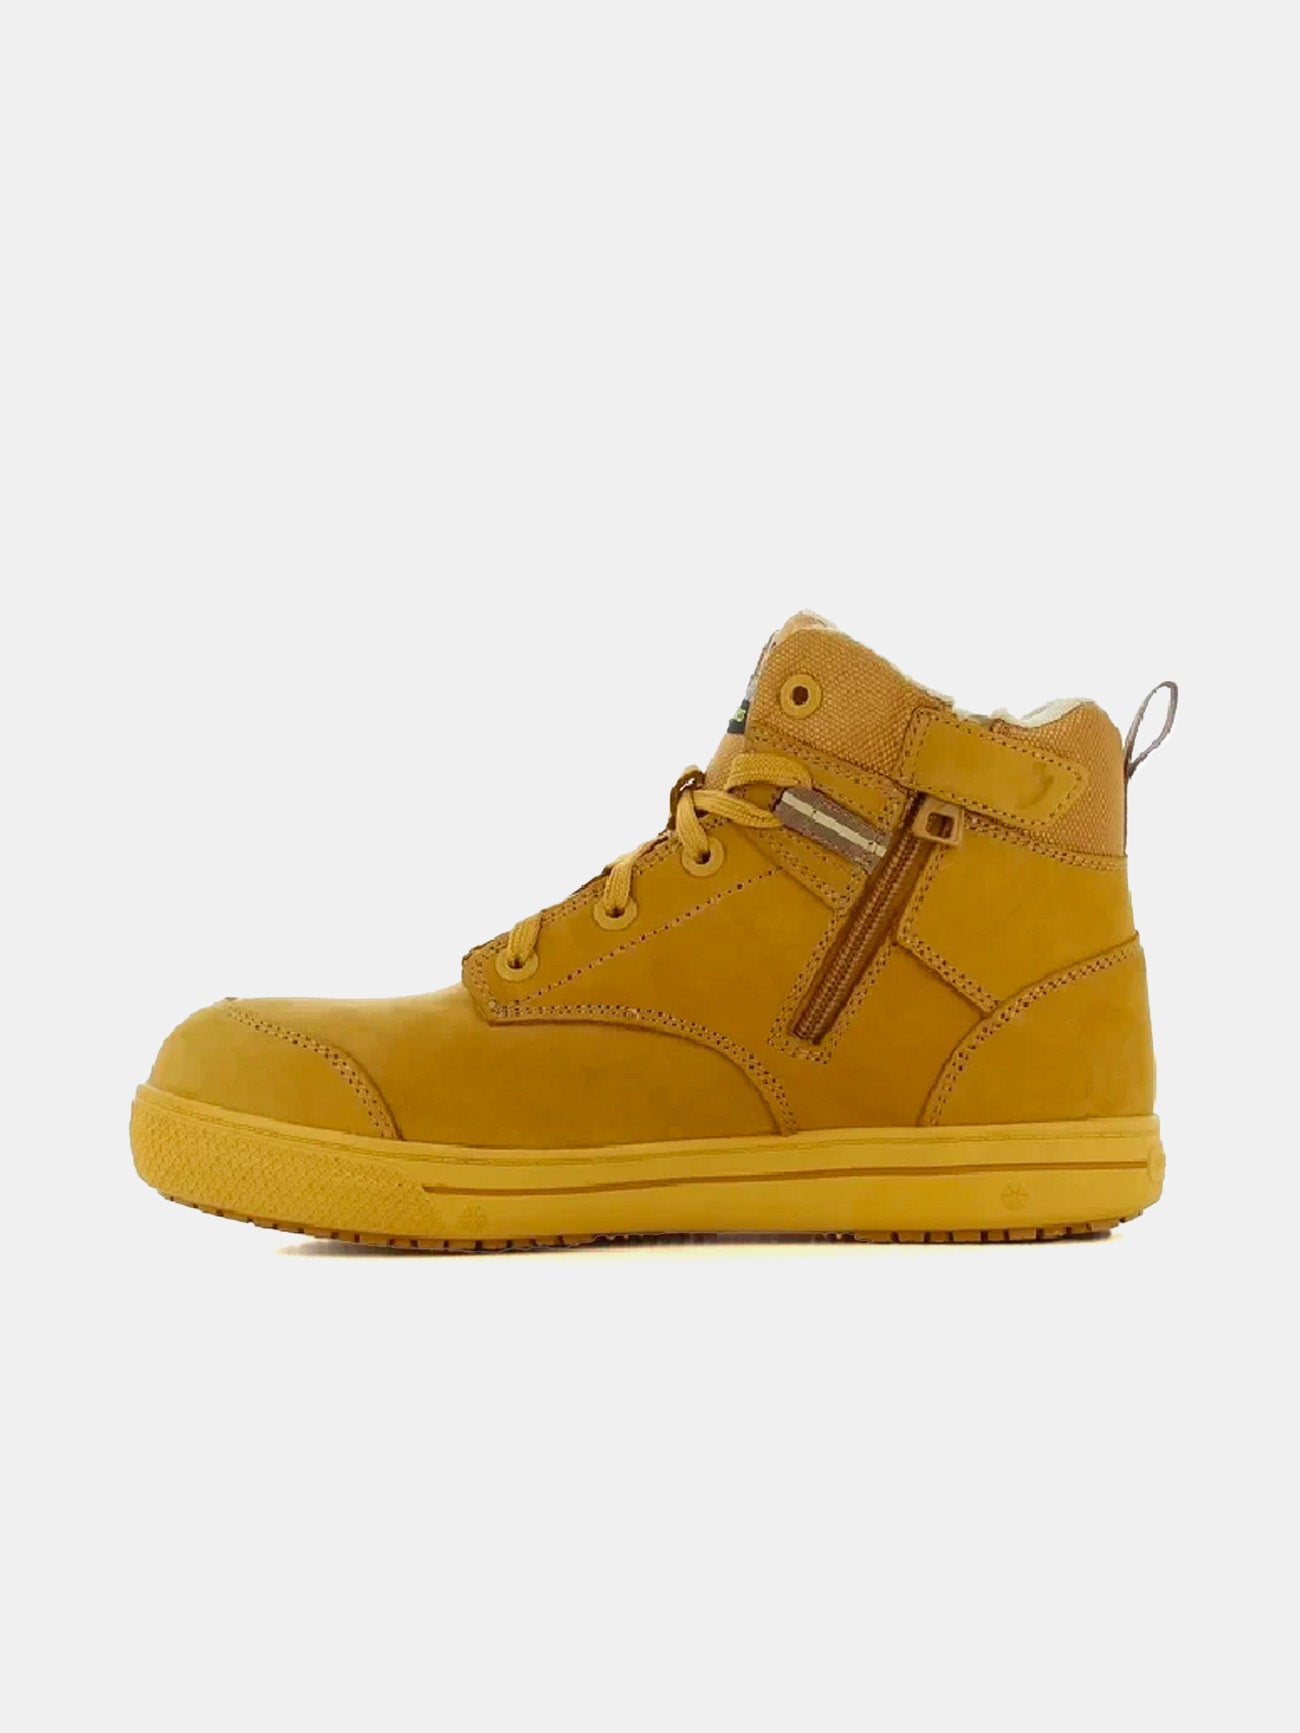 Safety Jogger Men's Cerro S3 Mid Safety Boots #color_Yellow